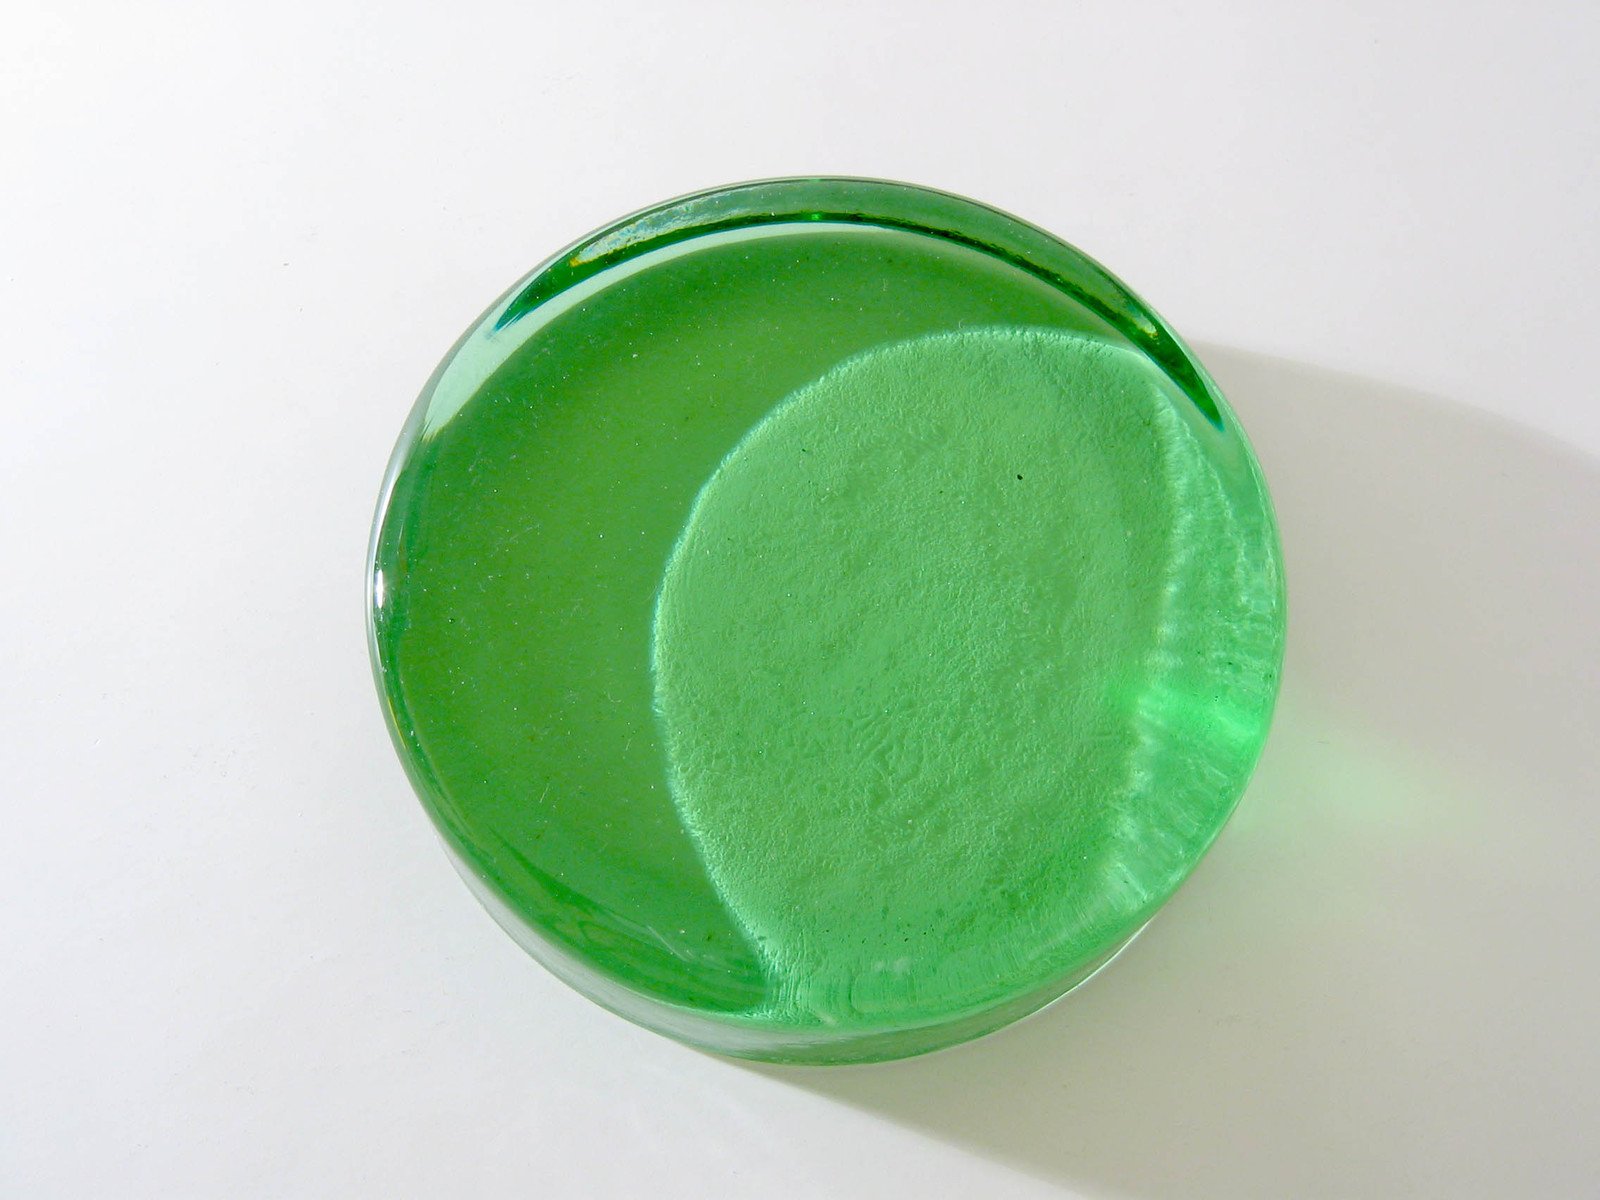 an oval glass vase filled with bright green liquid